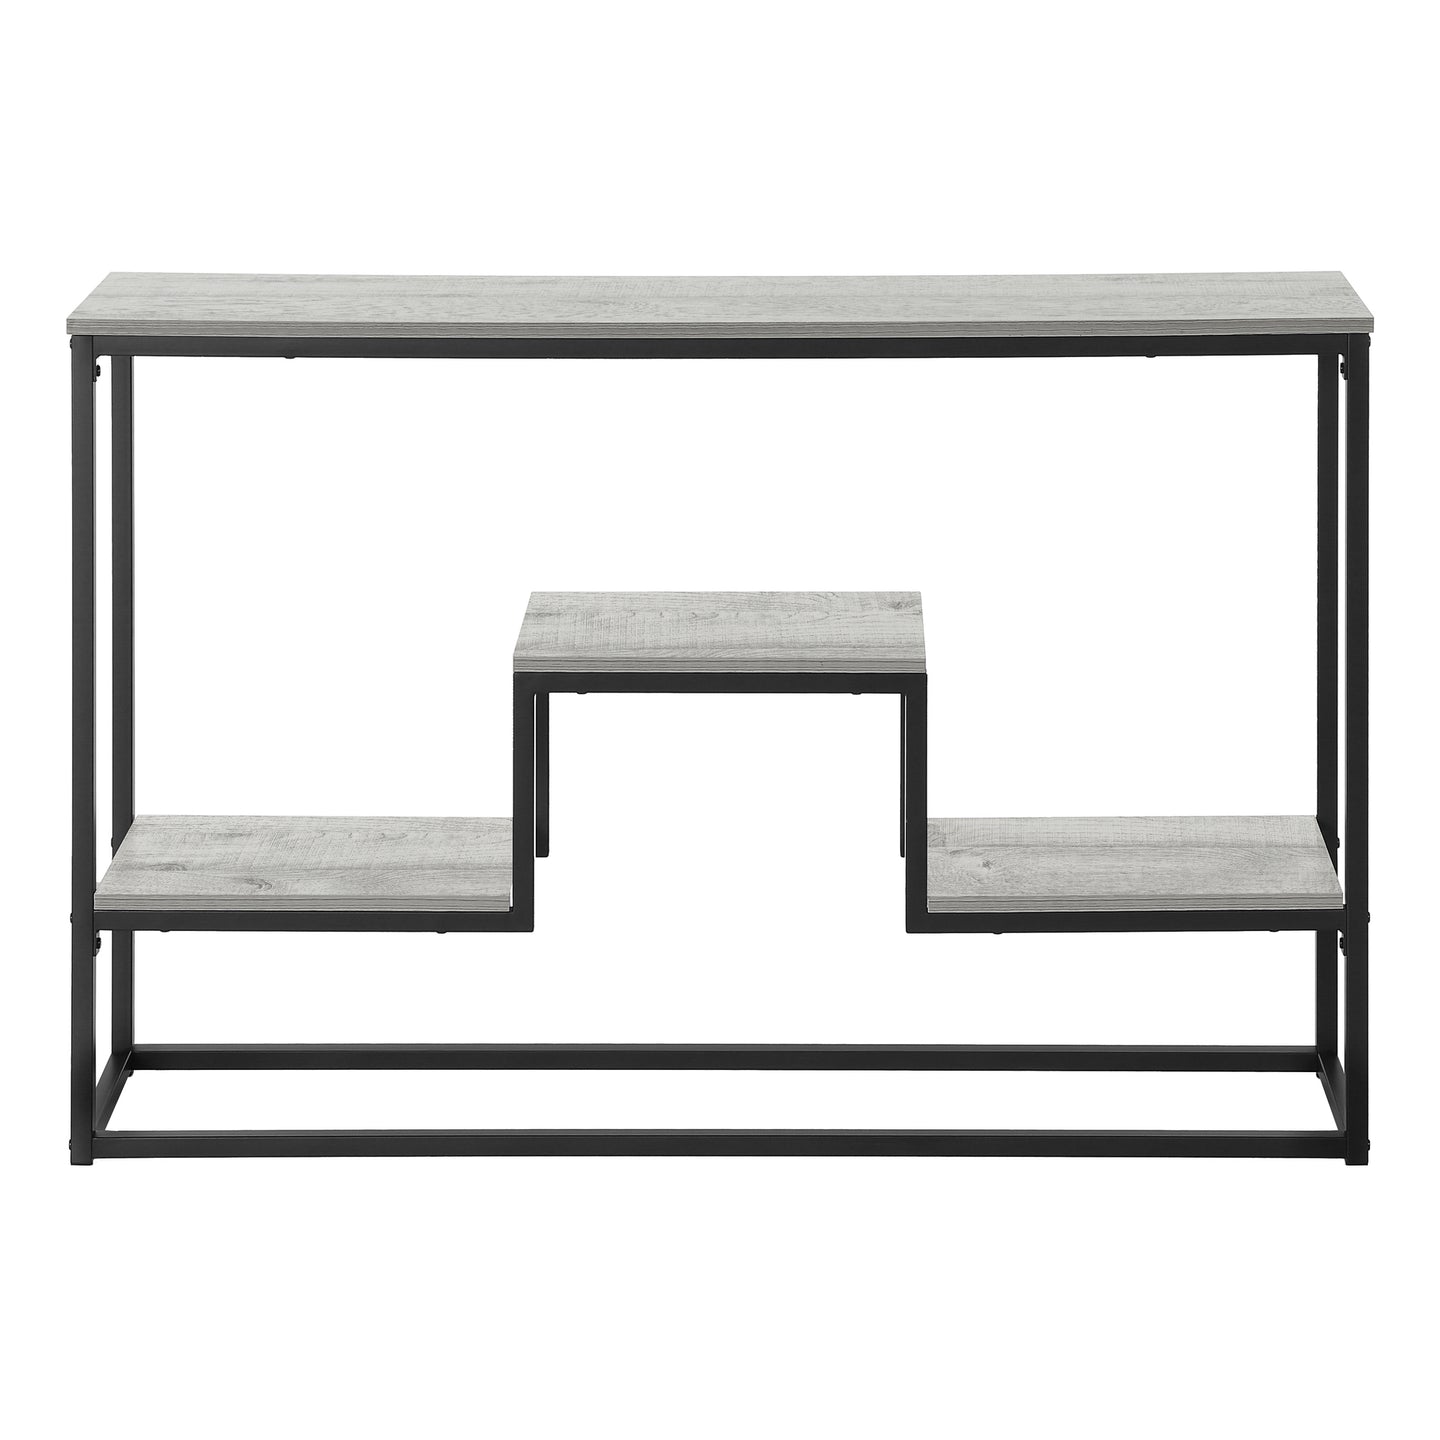 I 3580 Accent Table - 48"L / Grey / Black Metal Hall Console - Furniture Depot (7881118384376)